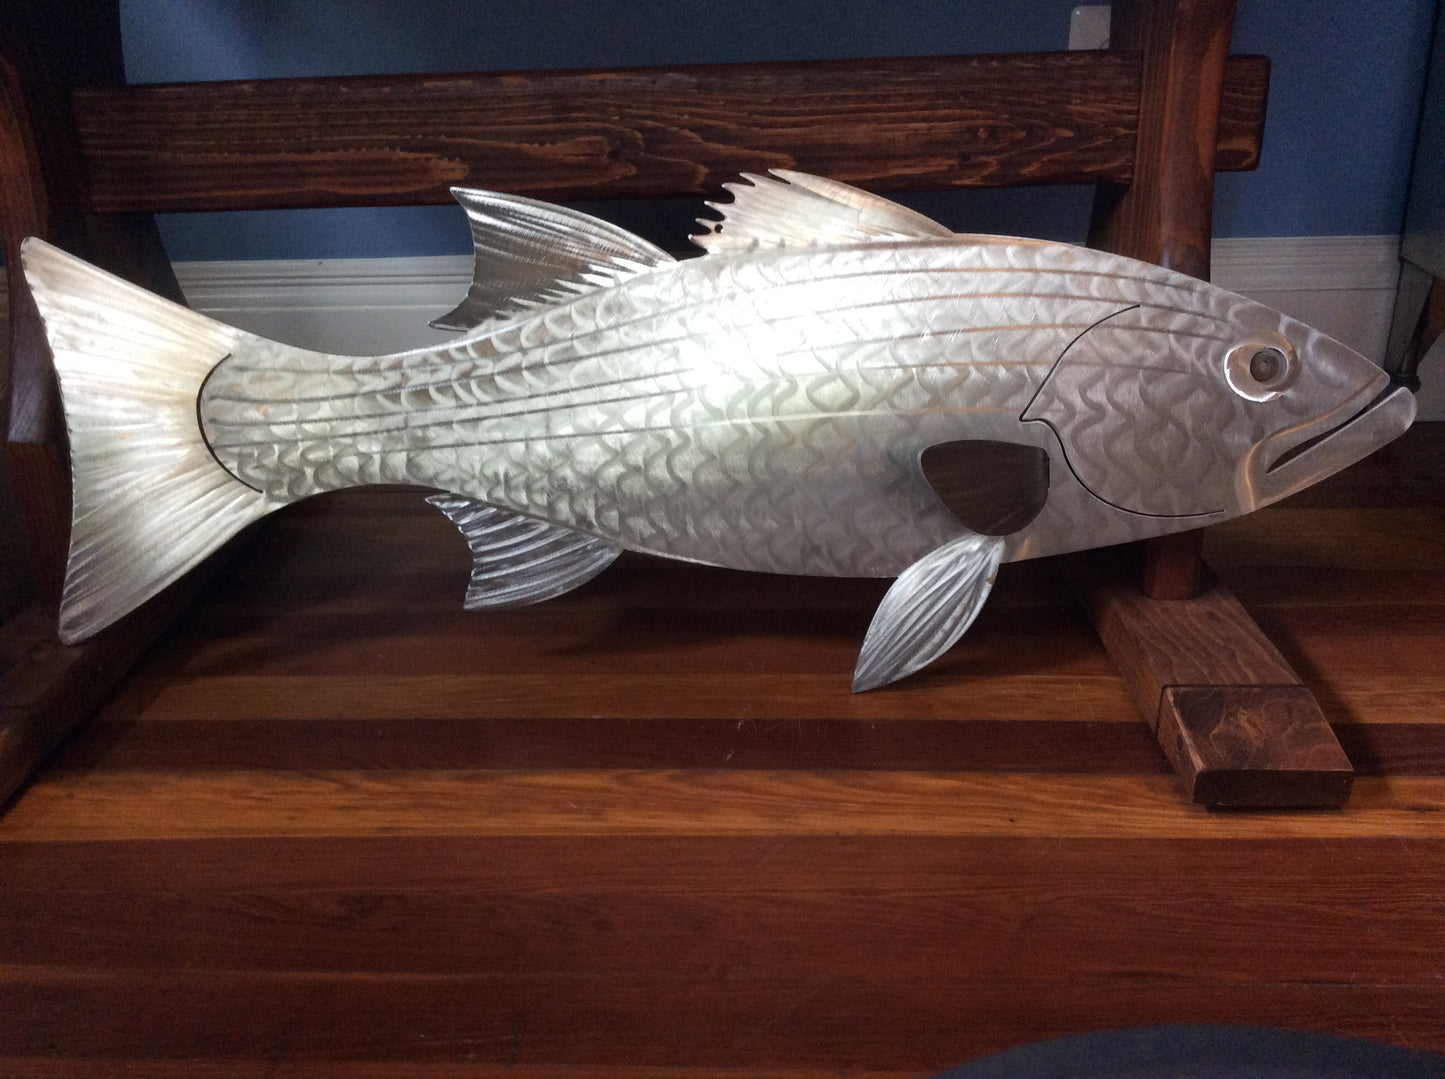 ROCK FISH, 36", stainless steel, hand-made - Annapolis Maritime Antiques